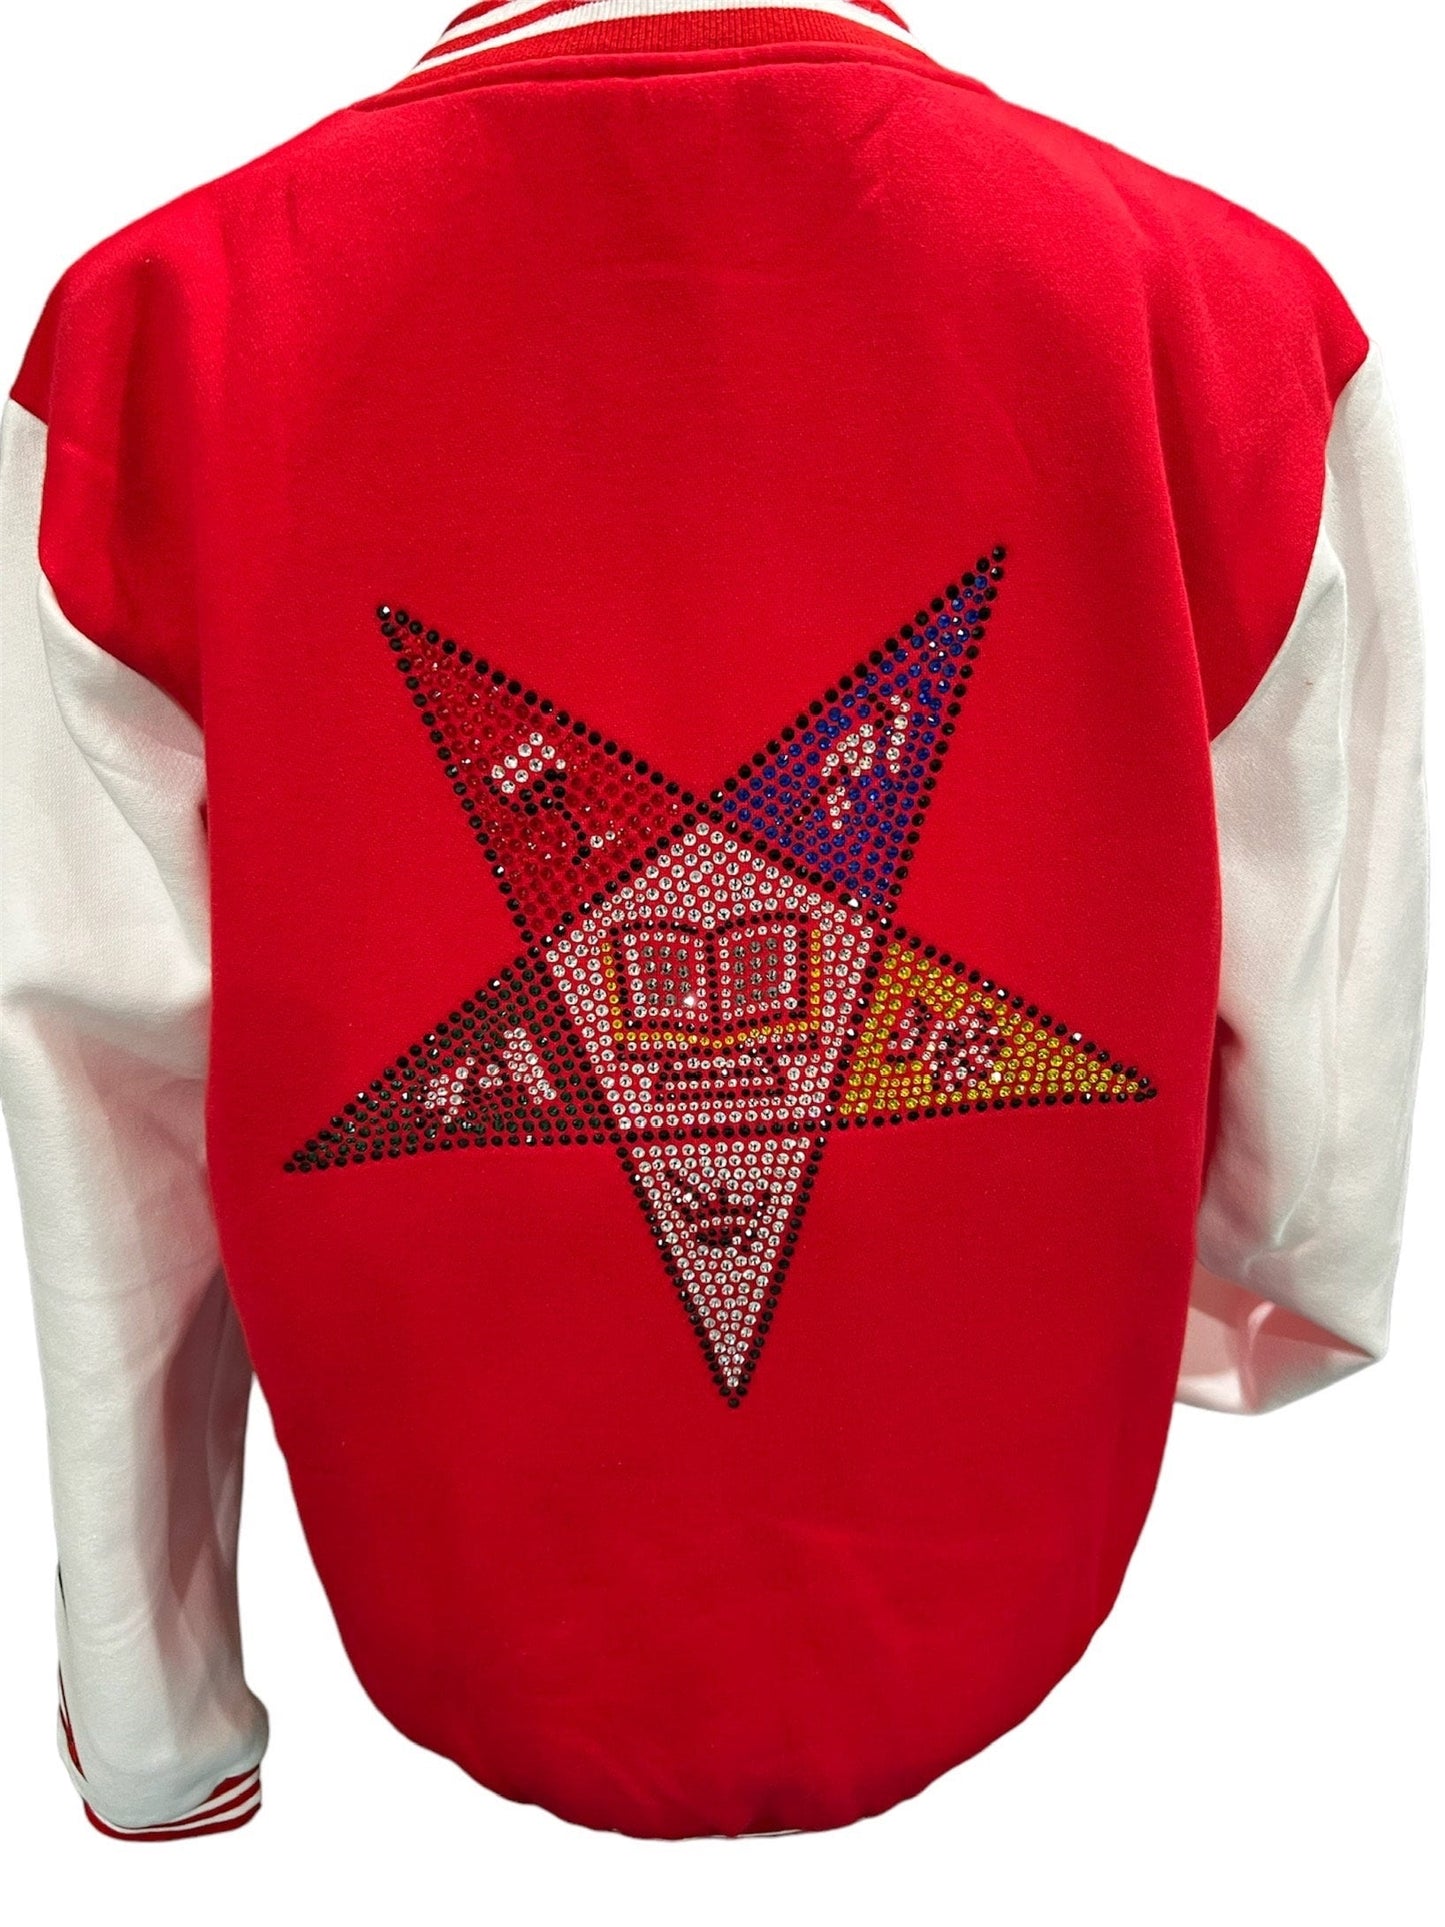 Personalized Oes order of Eastern Star Letterman varsity Jacket Bling design can be customized